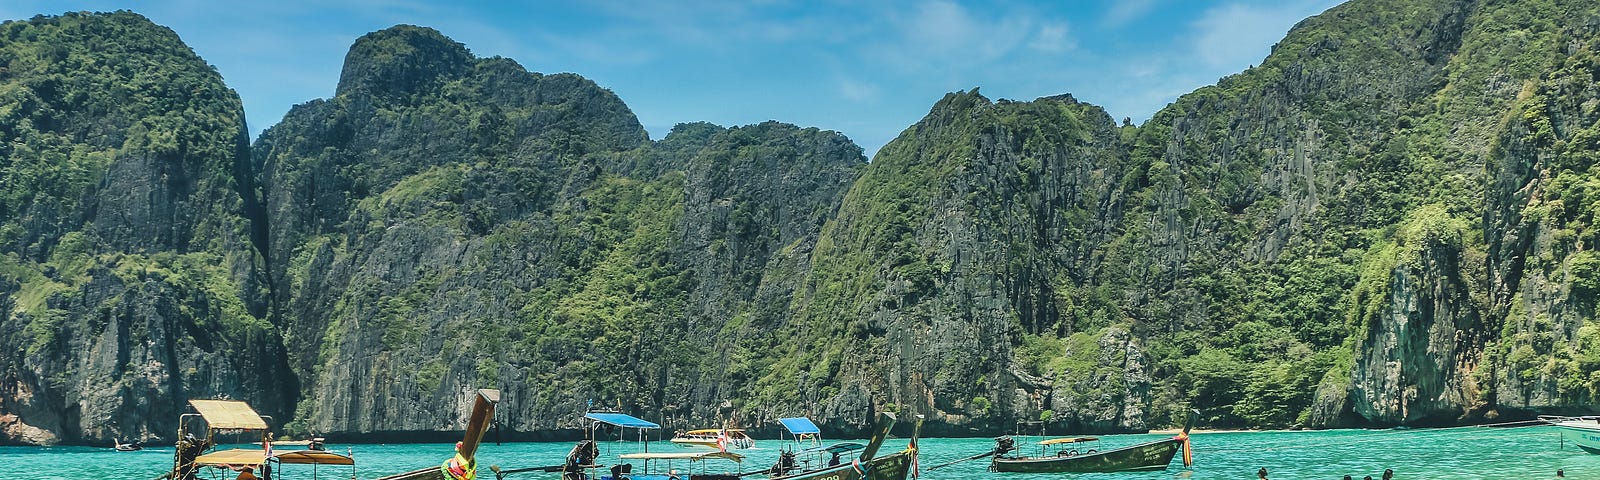 An image of a beach in Thailand, with traditional Thai longboats docked at the shore with mountains in the background.